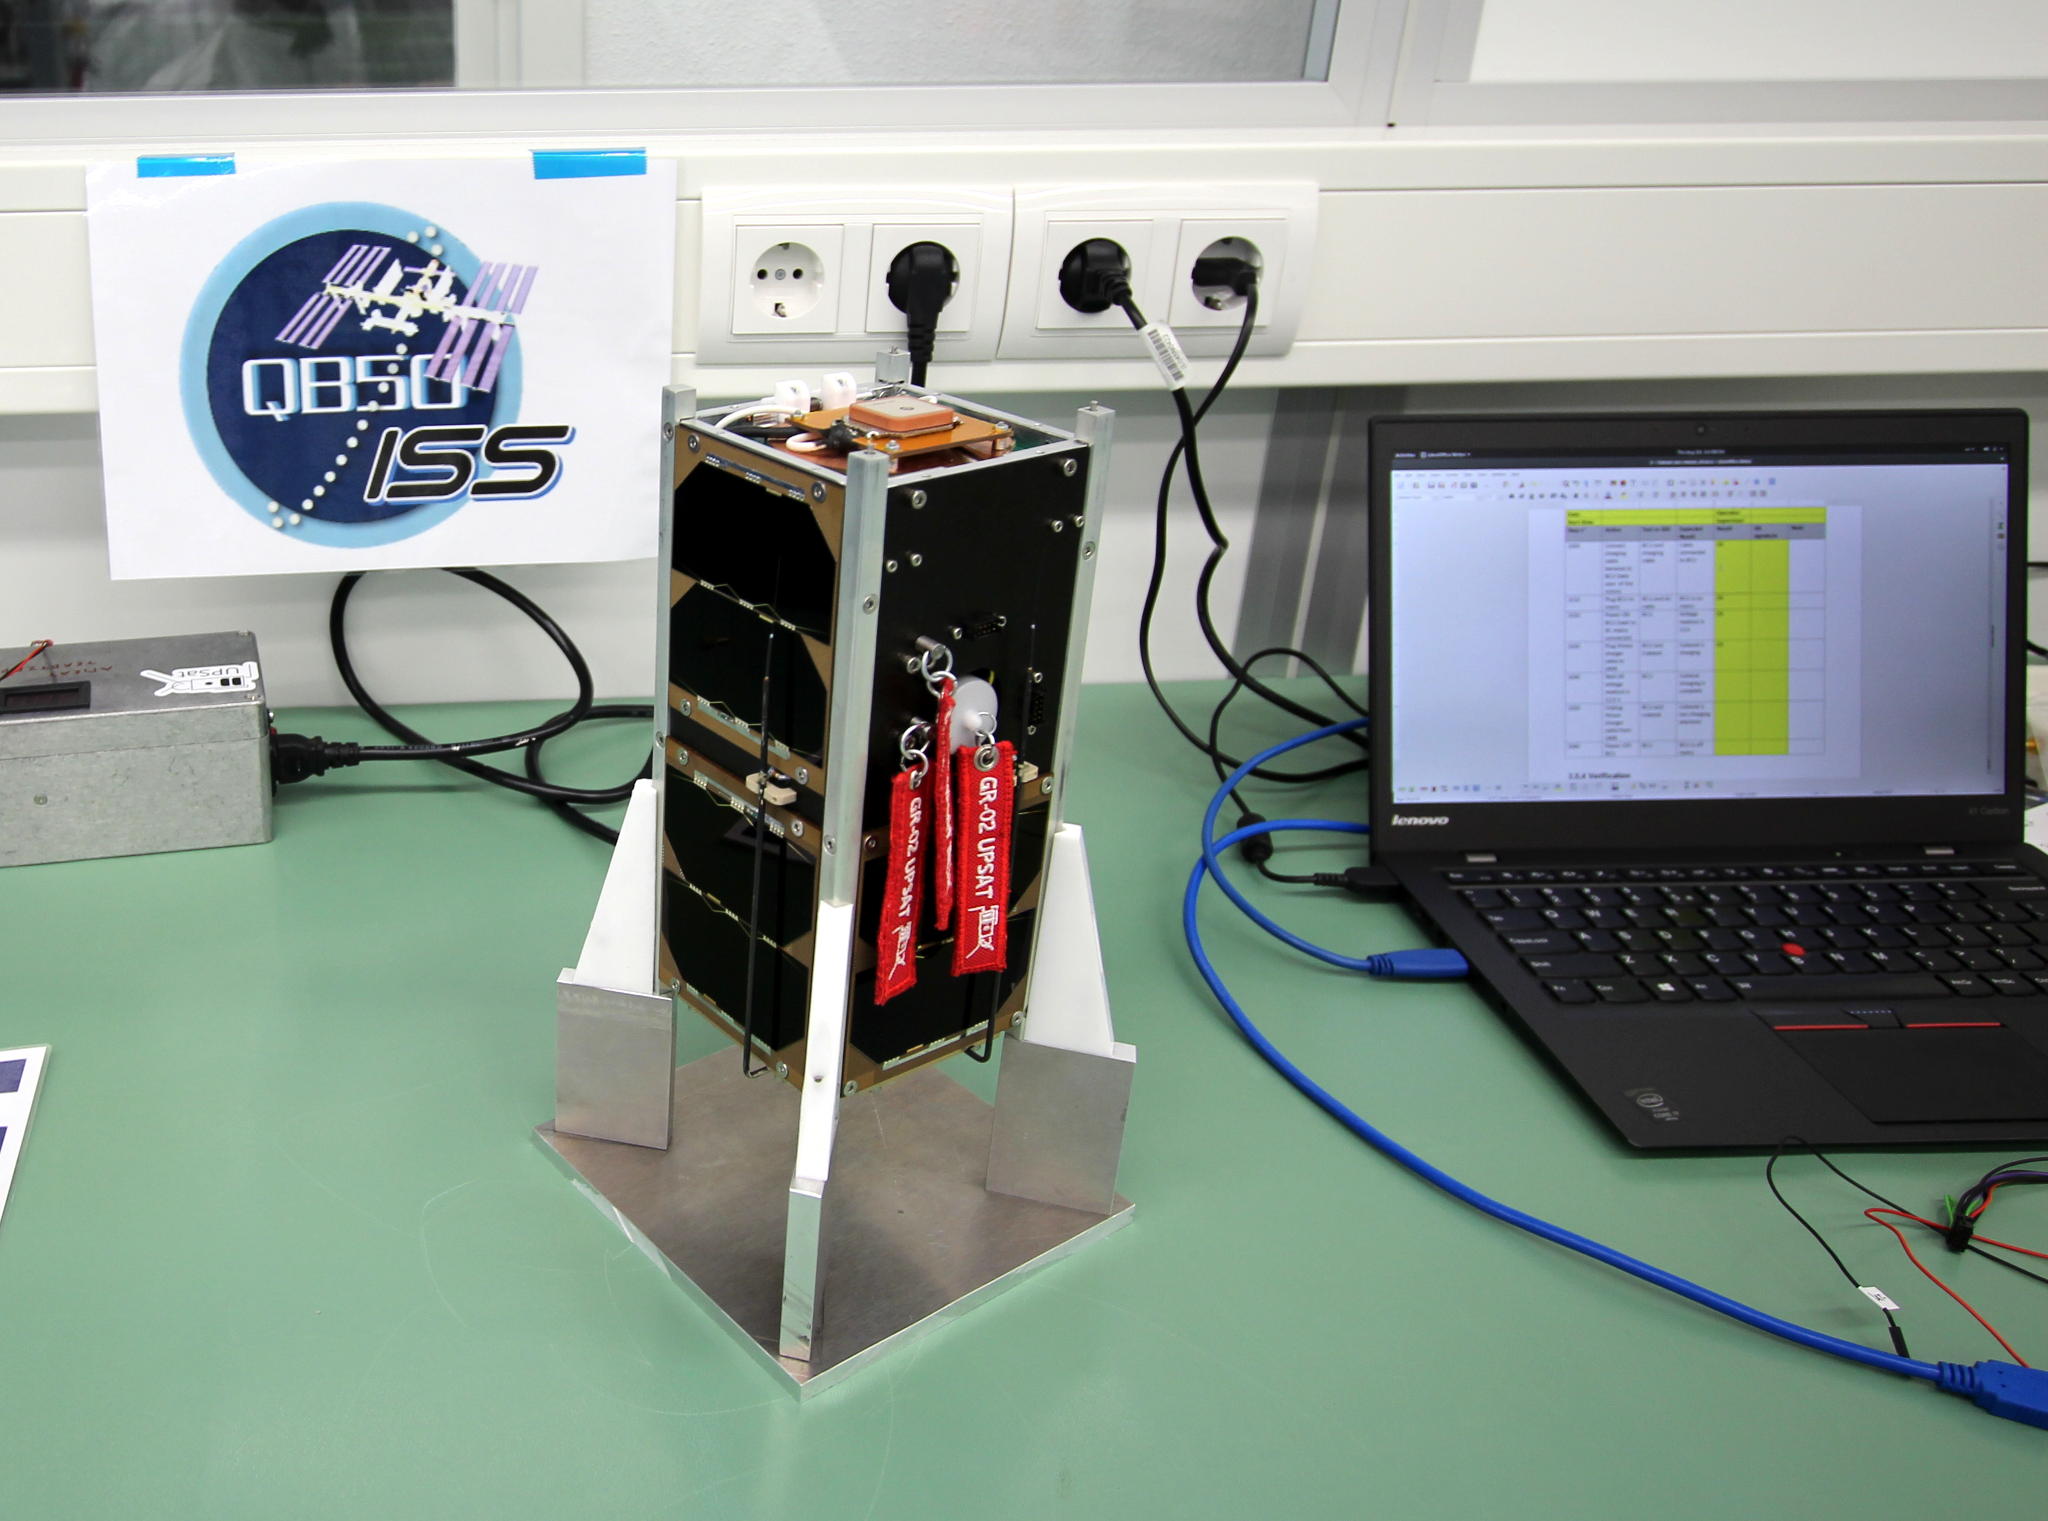 The first open source hardware satellite is delivered